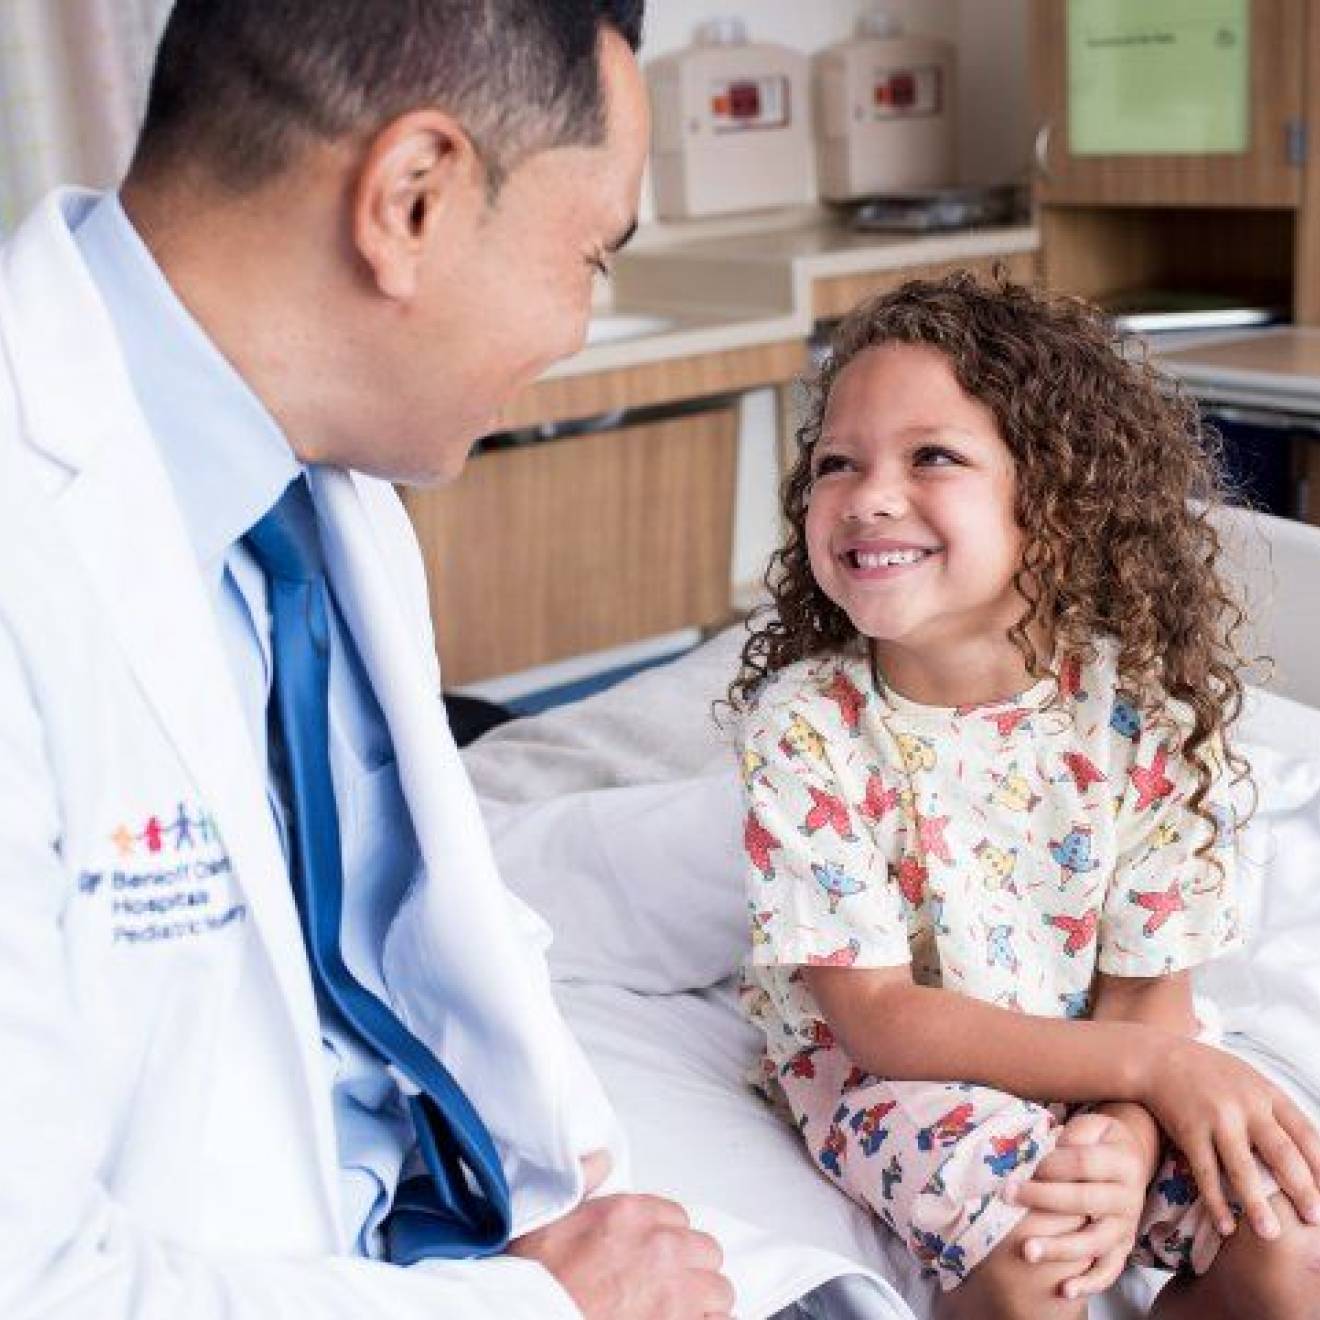 Kurtis Auguste, MD, a pediatric neurosurgeon, talks with a child in the Pediatric Brain Center at the UCSF Benioff Children’s Hospital.